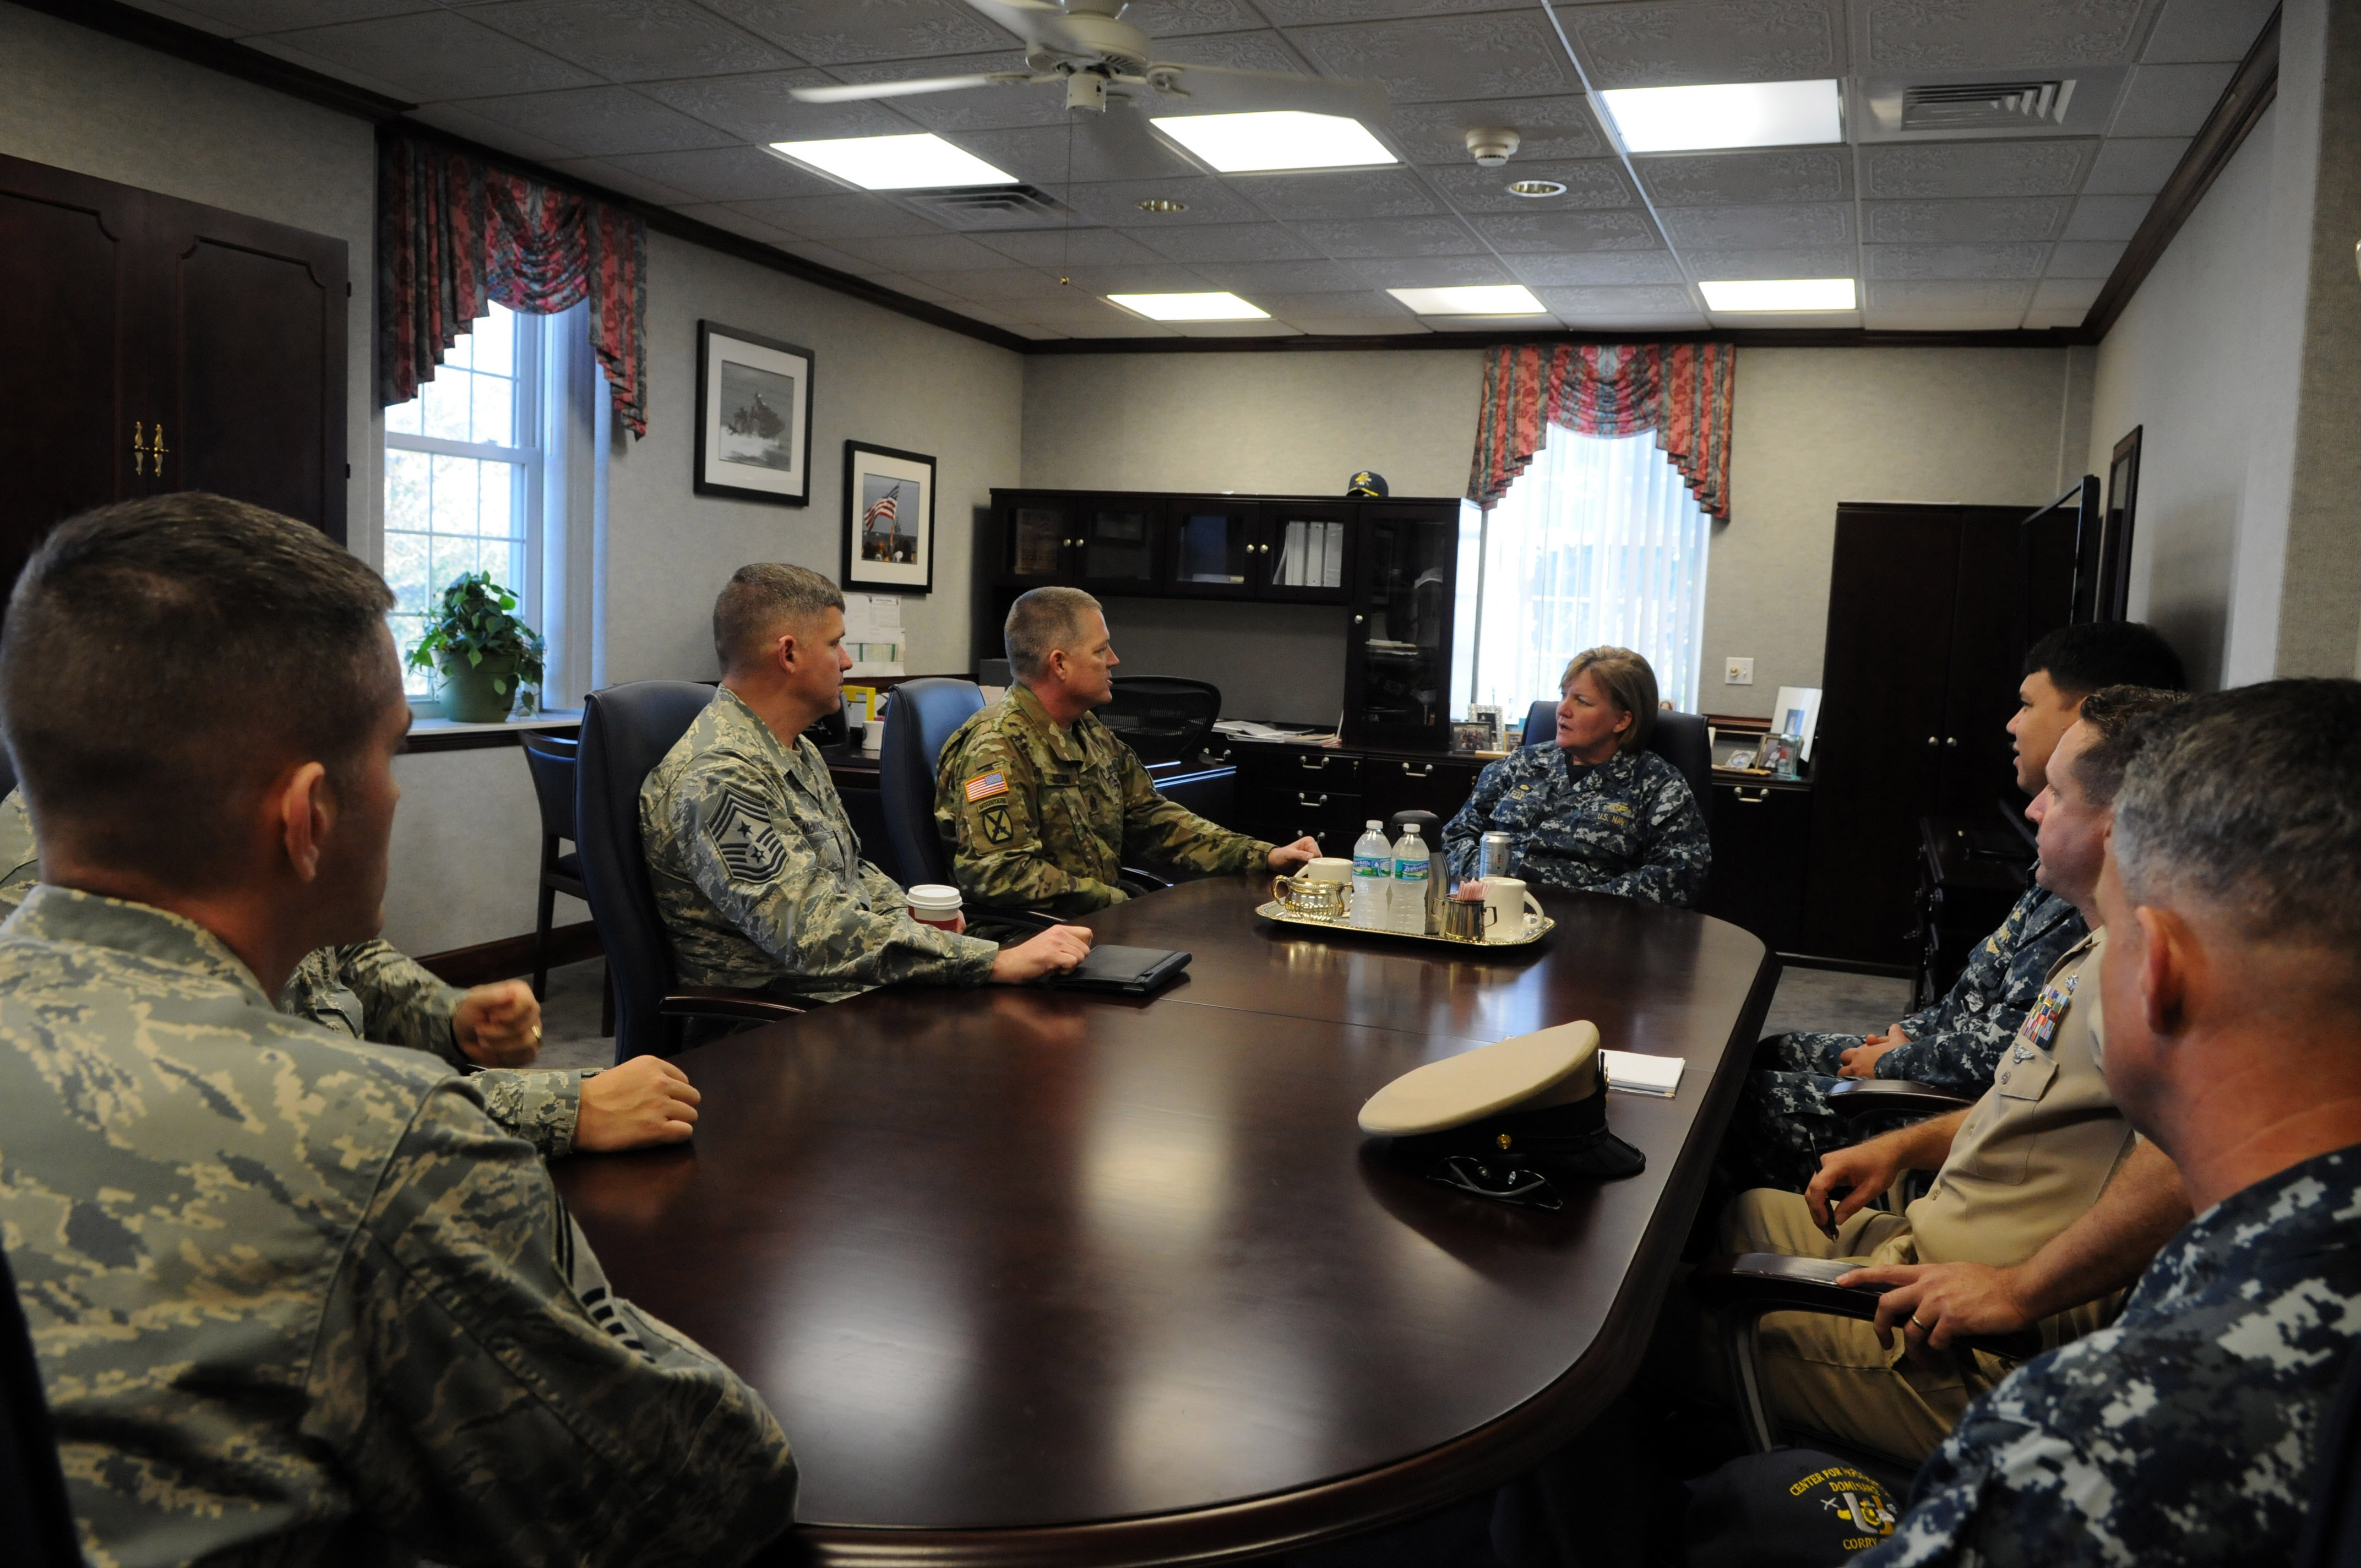 PENSACOLA, Fla. (Dec. 9, 2015) Command Sgt. Maj. David Redmon, National Security Affairs and U.S. Cyber Command senior enlisted leader, meets with Capt. Maureen Fox, Center for Information Dominance (CID) commanding officer, and her staff to discuss training.  CID is the Naval Education and Training Command learning center that leads, manages and delivers Navy and joint forces training in information operations, information warfare, information technology, cryptology and intelligence. Photo by Carla M. McCarthy.